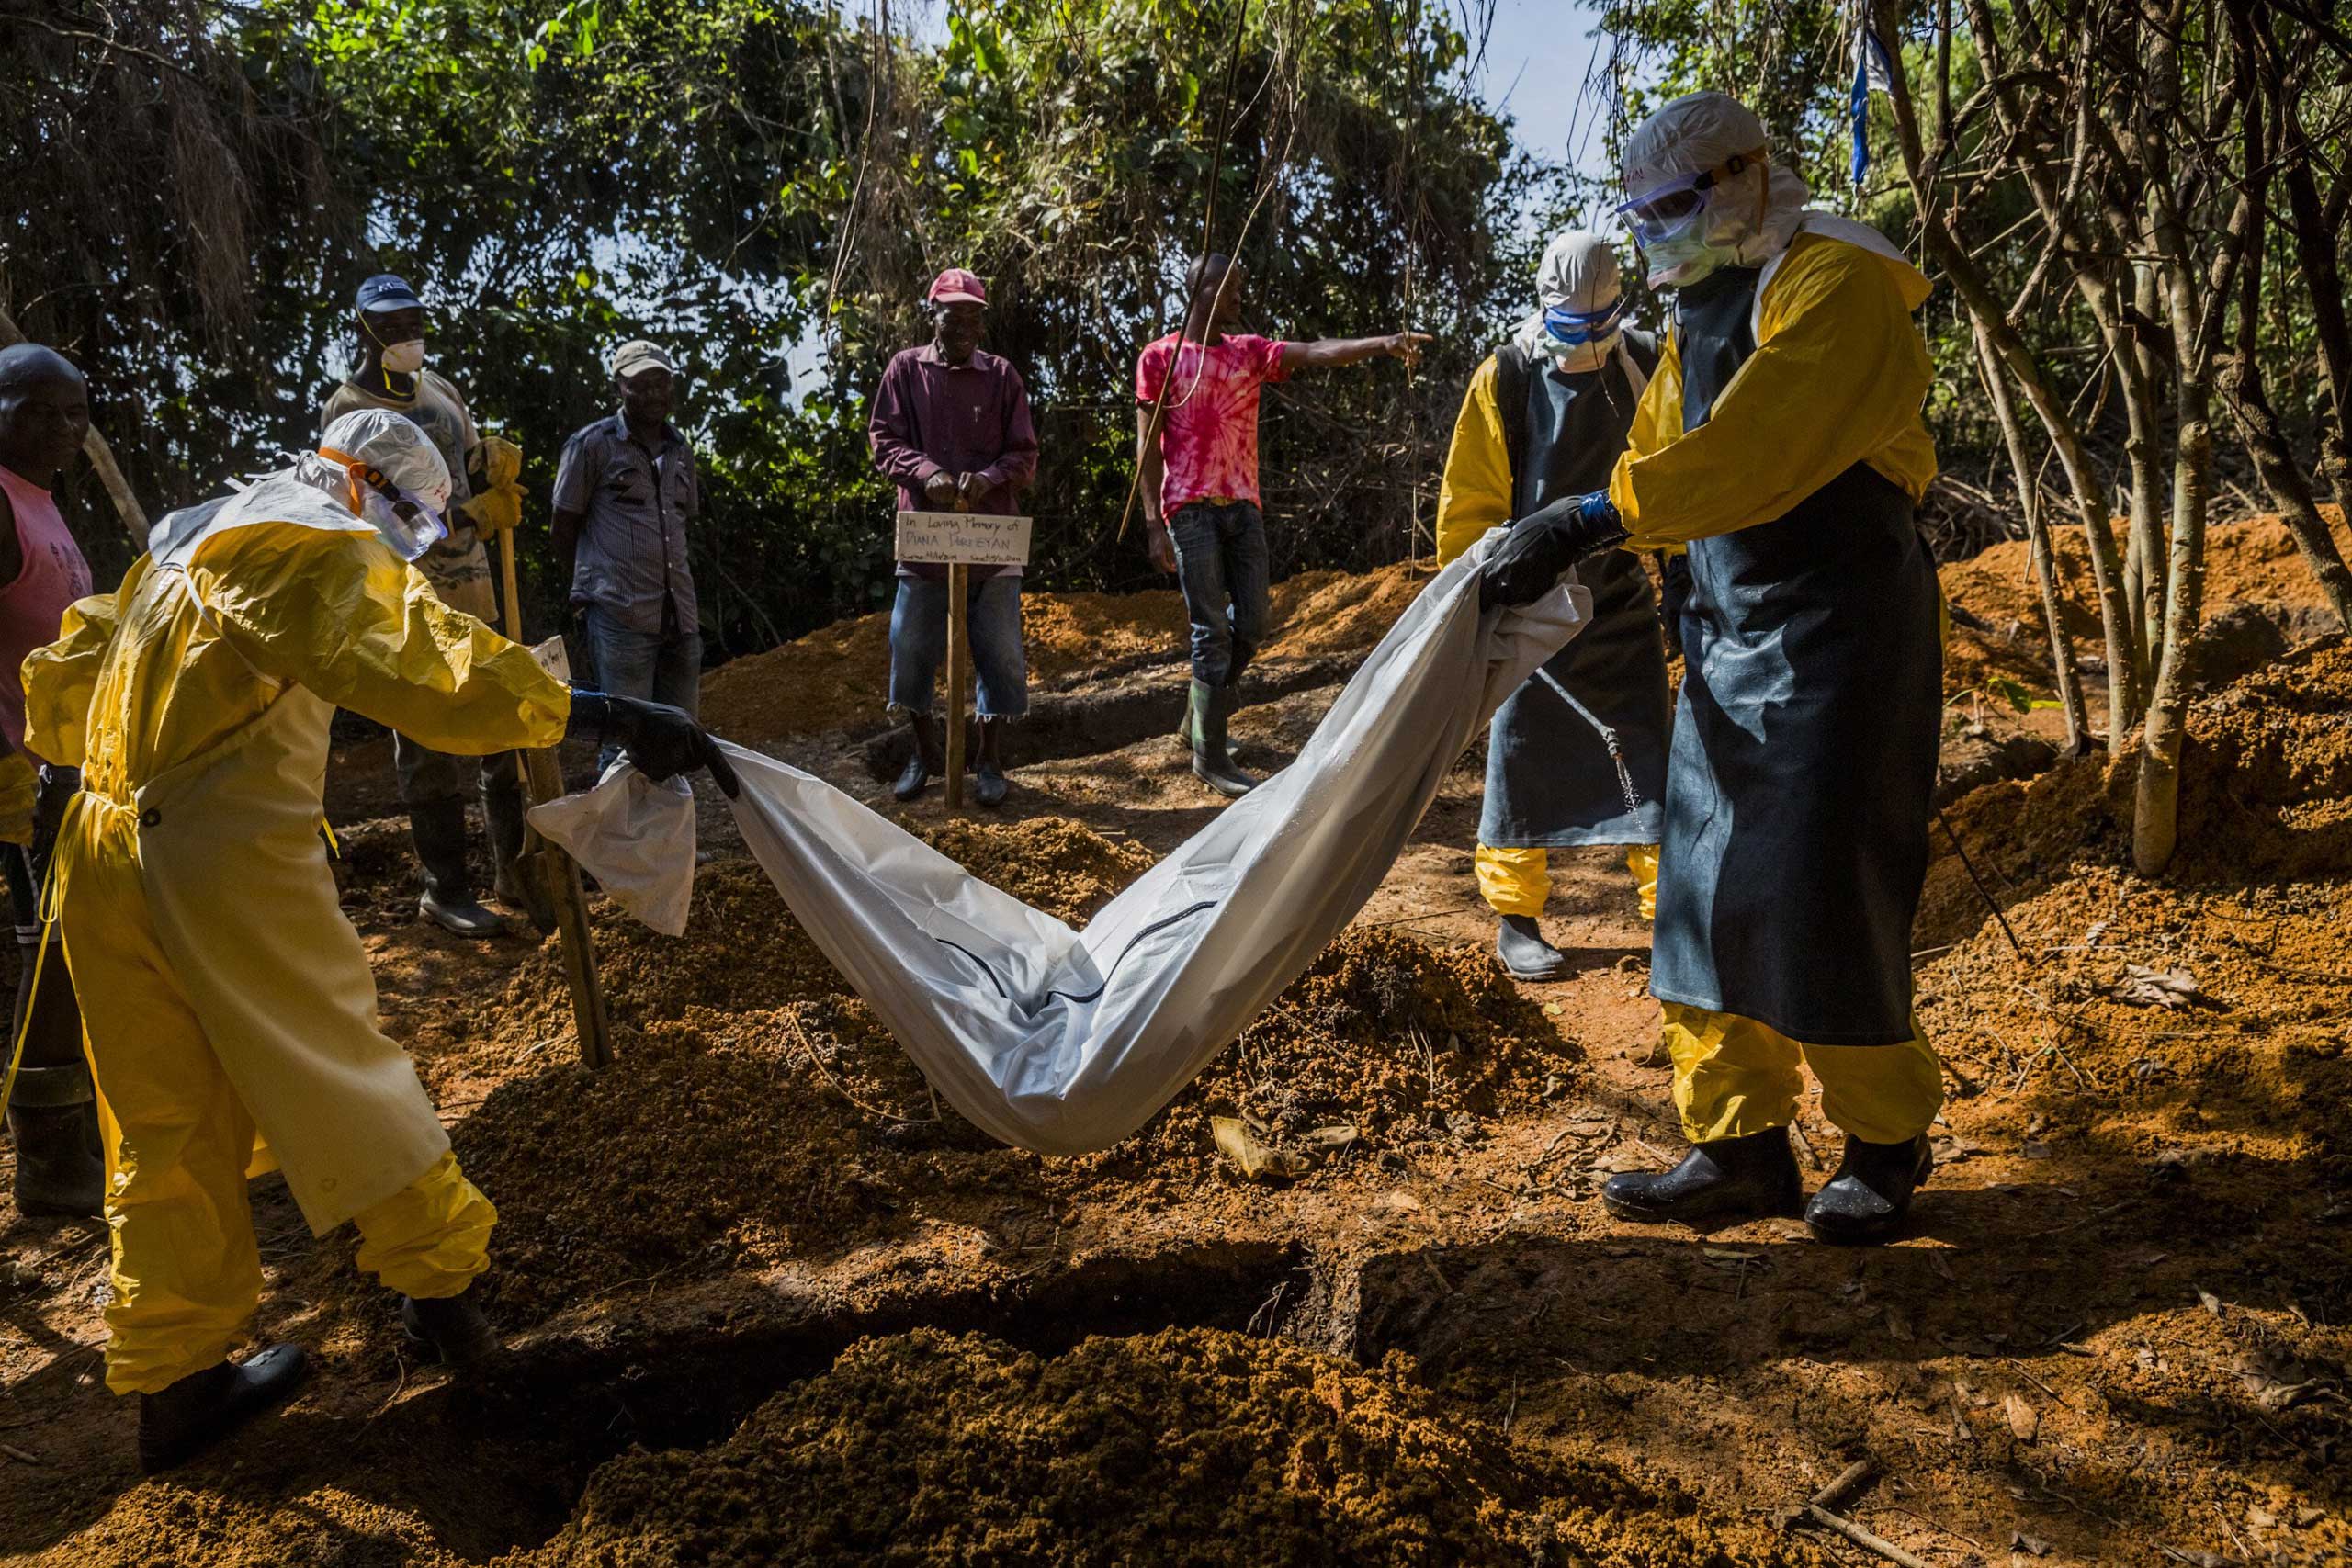 Members of a burial team wearing protective gear inter the body of 4-day-old Diana Dormeyan, named for her mother who died shortly after giving birth, at a graveyard adjacent to the Bong County Ebola Treatment Unit near Gbarnga, Liberia, Oct. 8, 2014. (Daniel Berehulak—The New York Times/Redux)